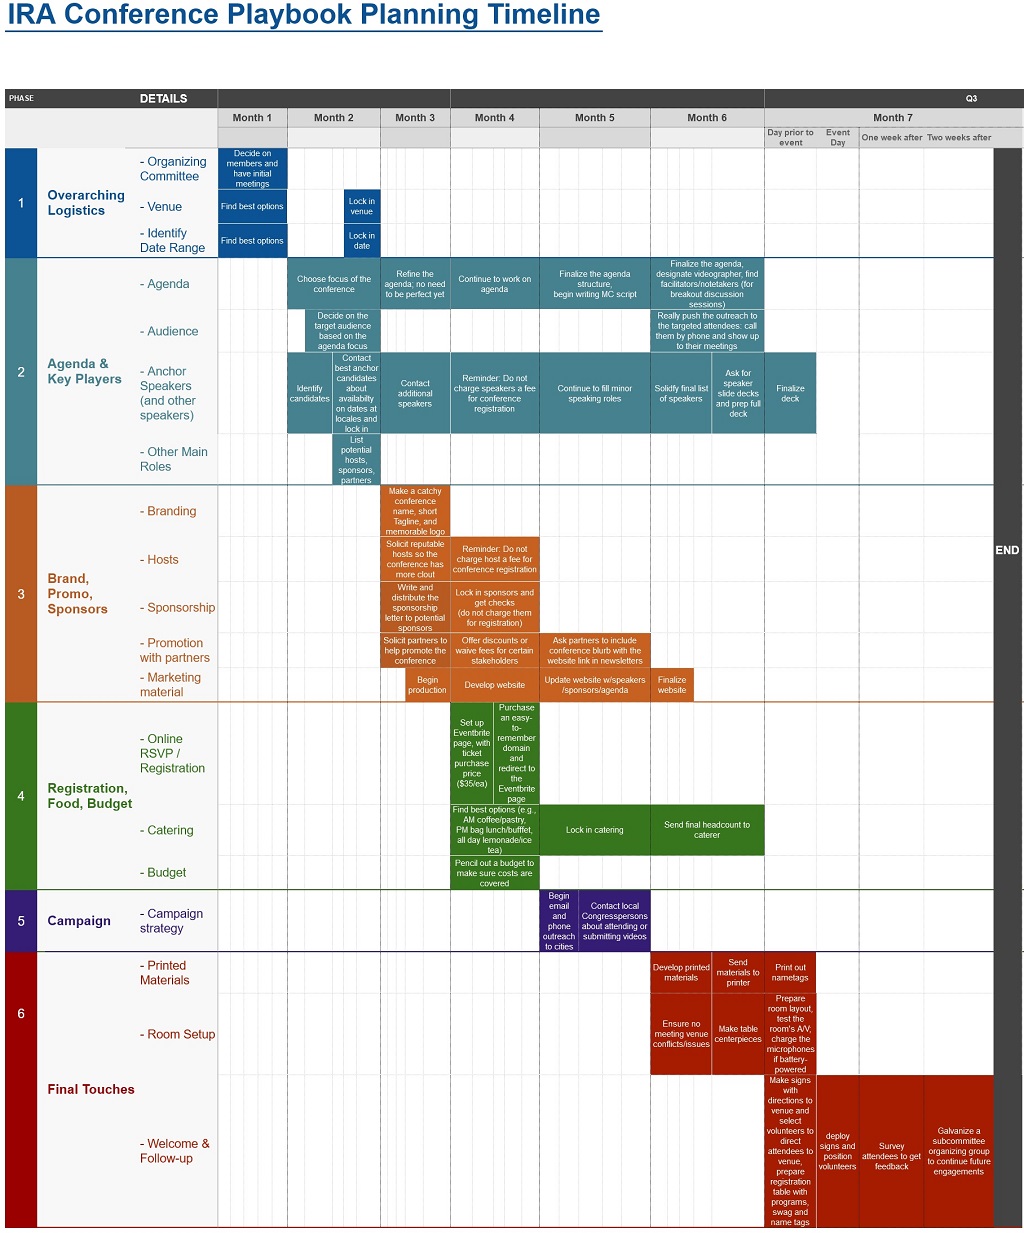 Colorful timeline spreadsheet so steps to organizing an IRA Conference